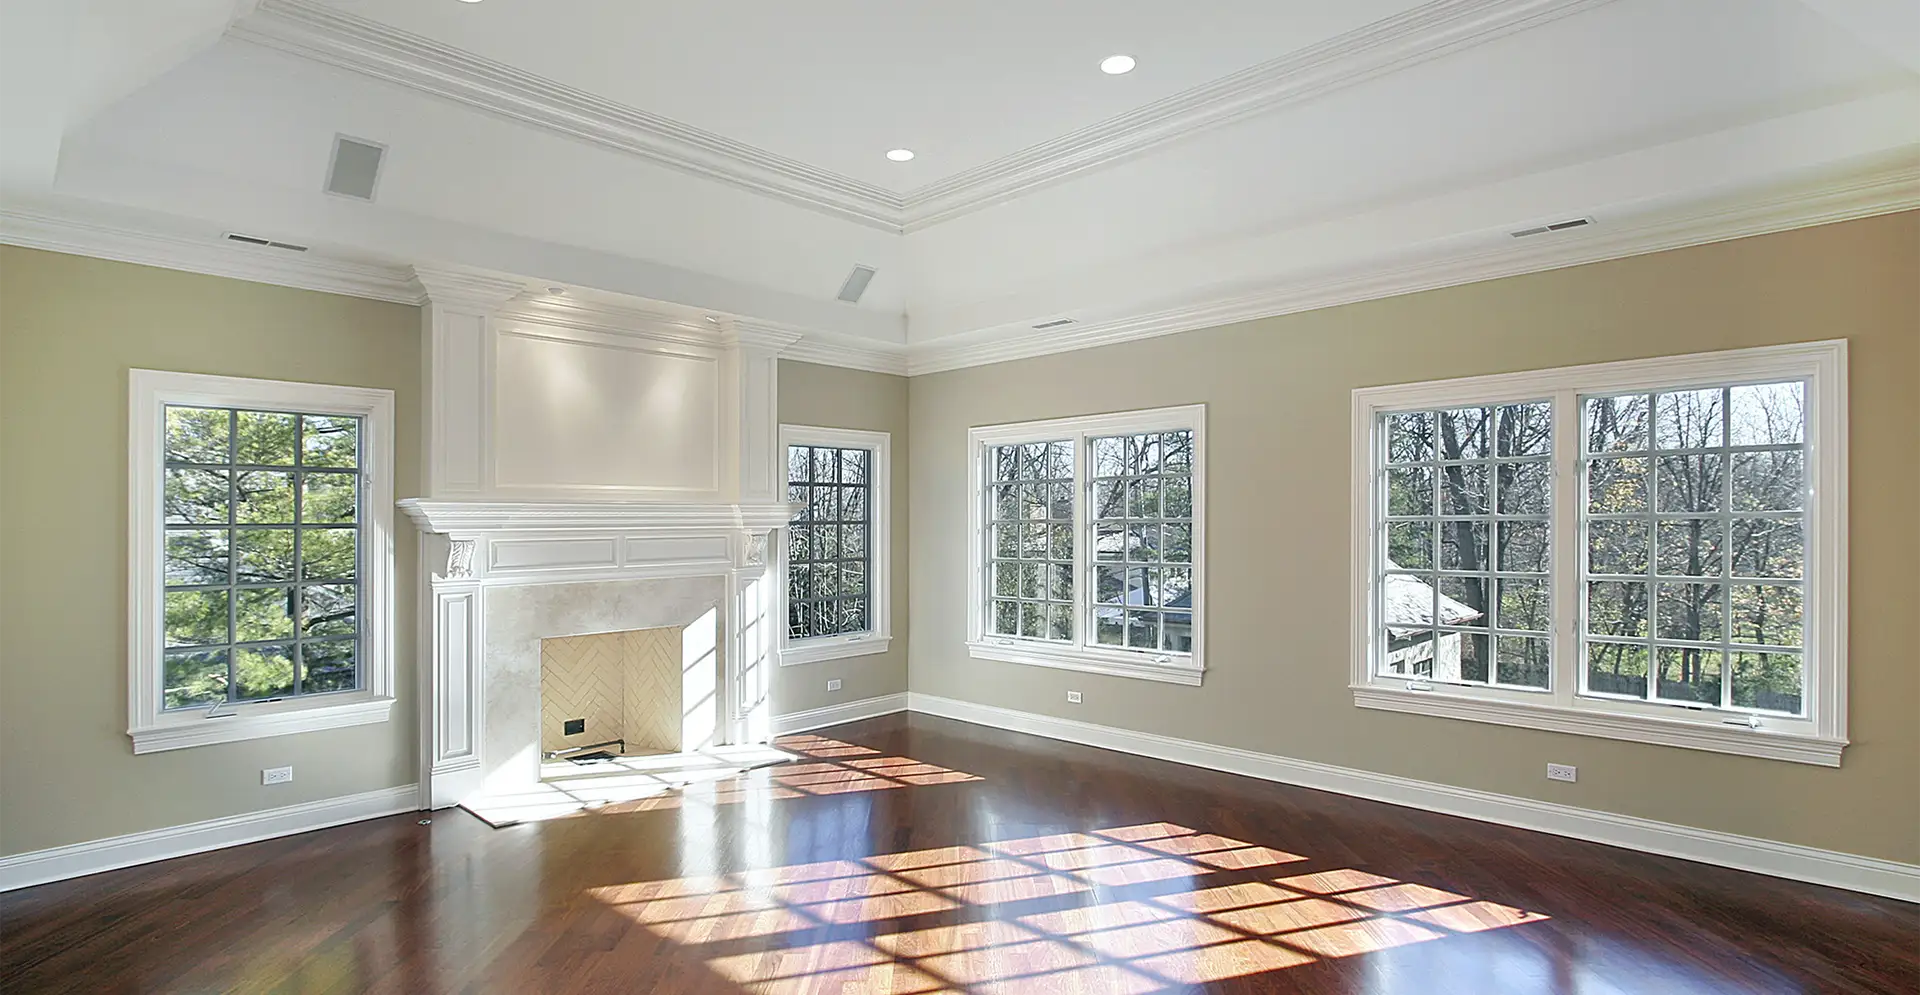 A living room featuring ornate wood moulding and window trim painted in white, located in Riverside County